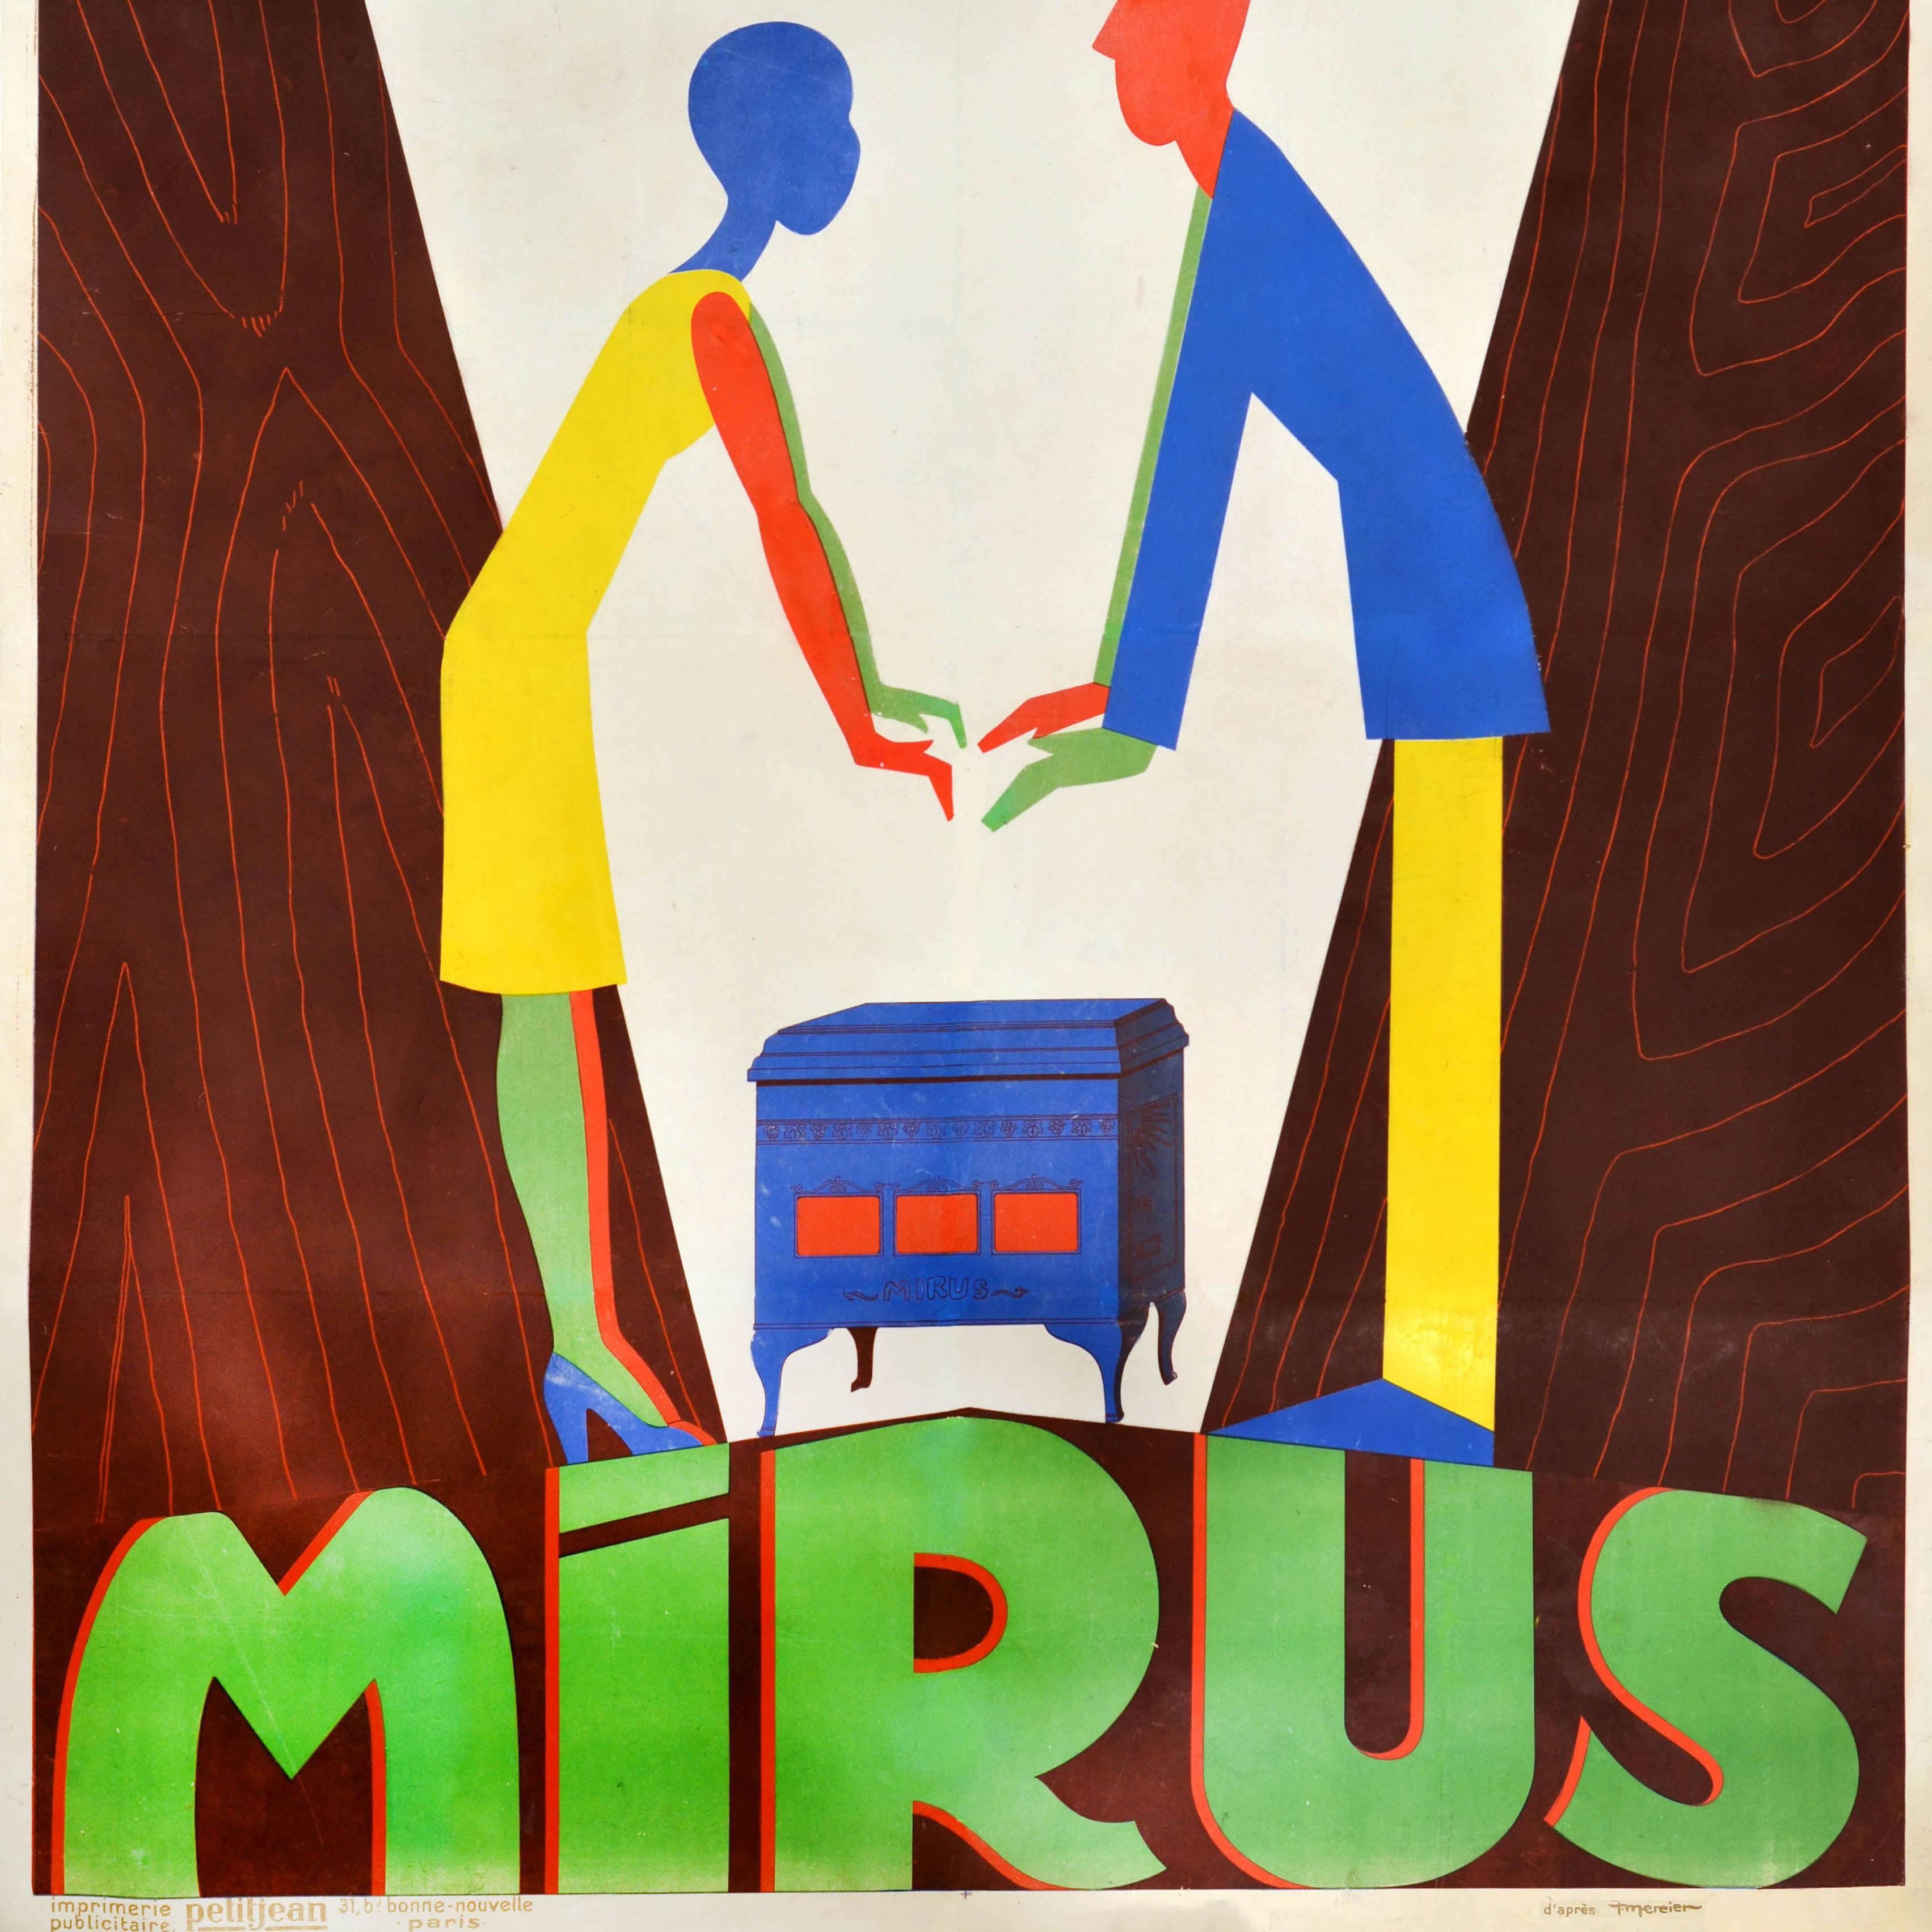 Original antique advertising poster for Mirus poele a bois / wood burning heaters featuring a colourful stylised illustration of a lady and a man warming their hands over the stove set on a V shaped white and wooden pattern background with the text